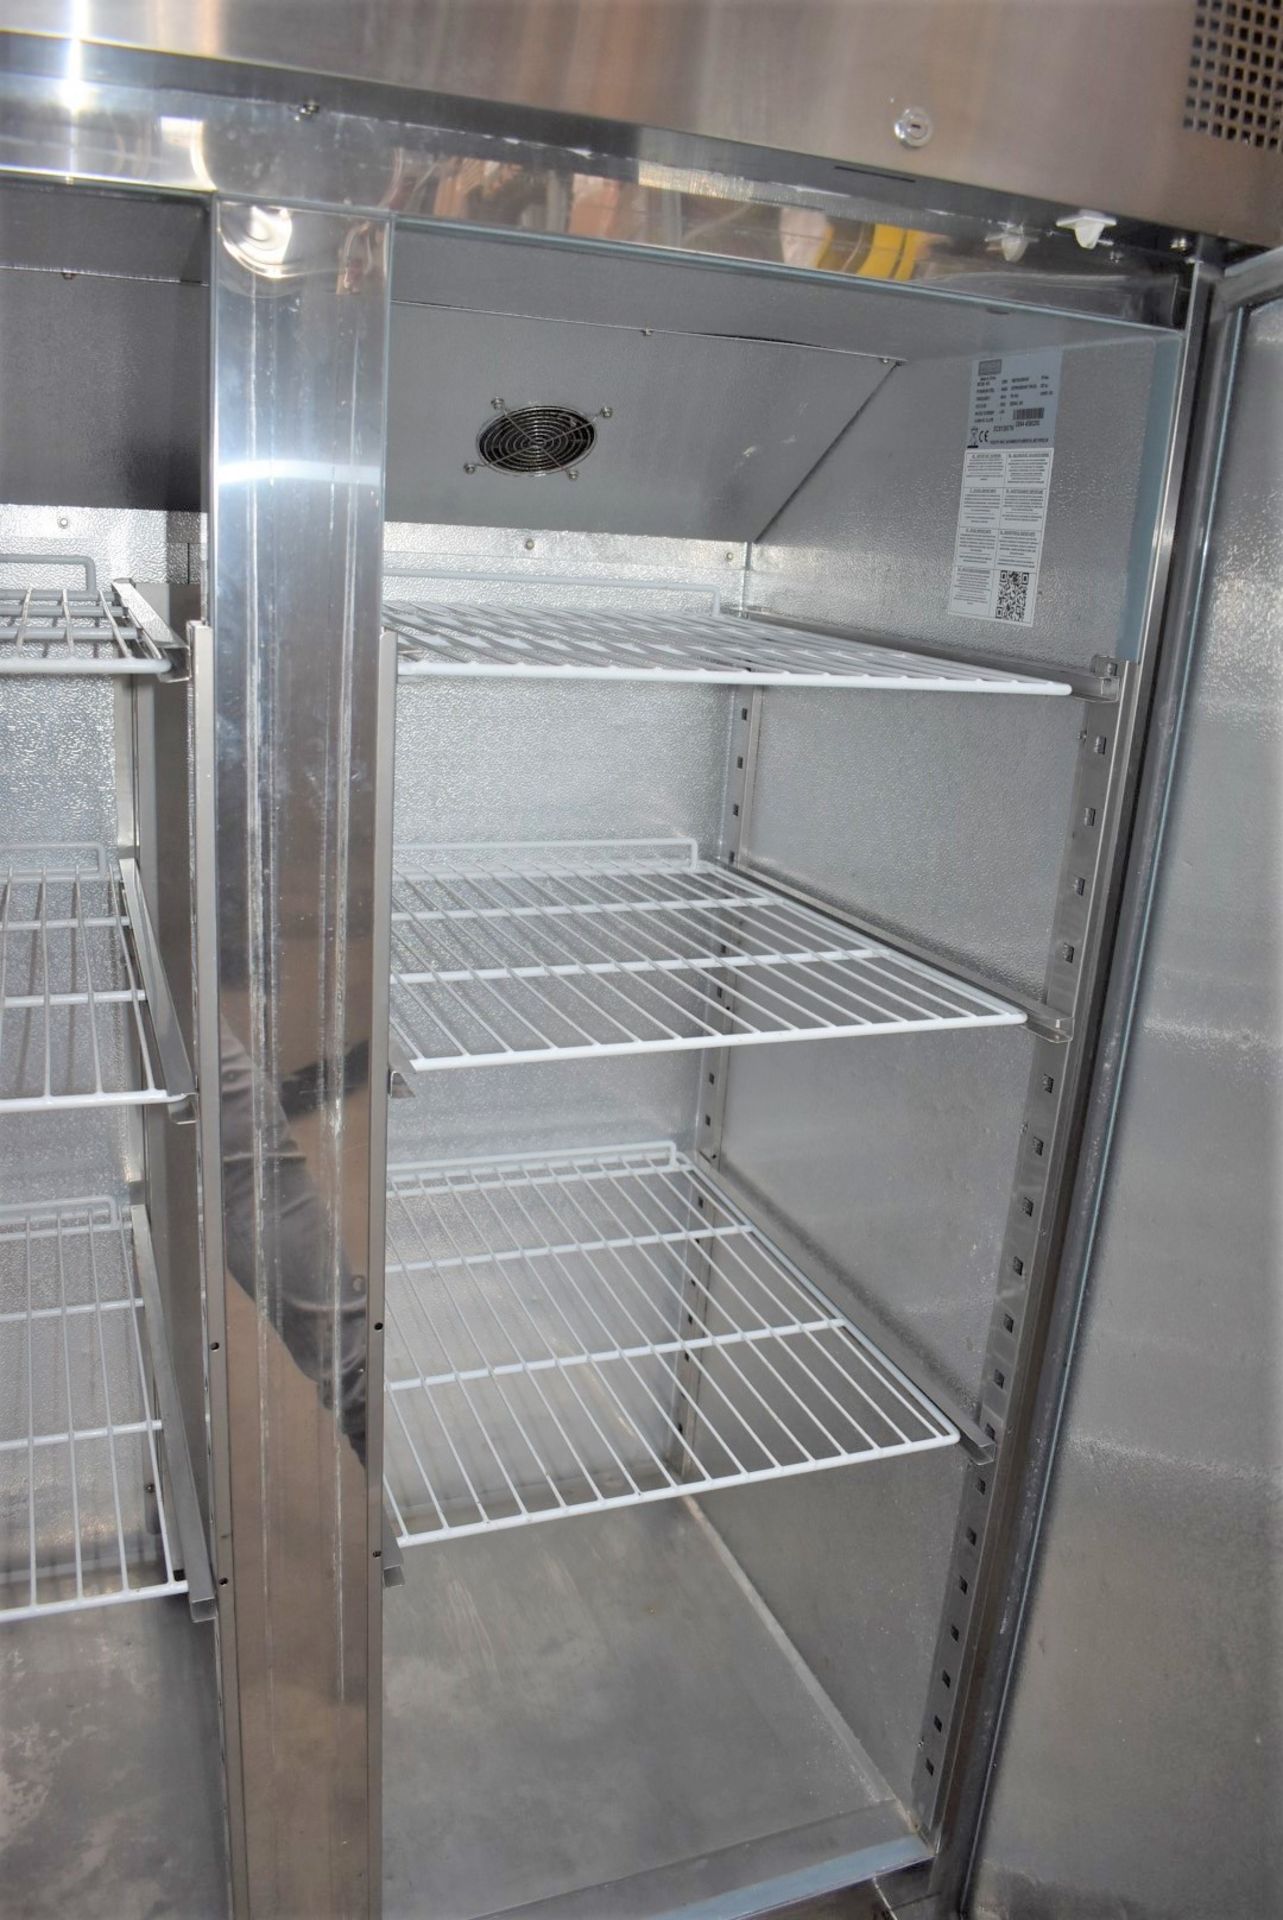 1 x Polar G Series Upright Double Door Refrigerator - Model G594 - Complete With Internal - Image 6 of 18